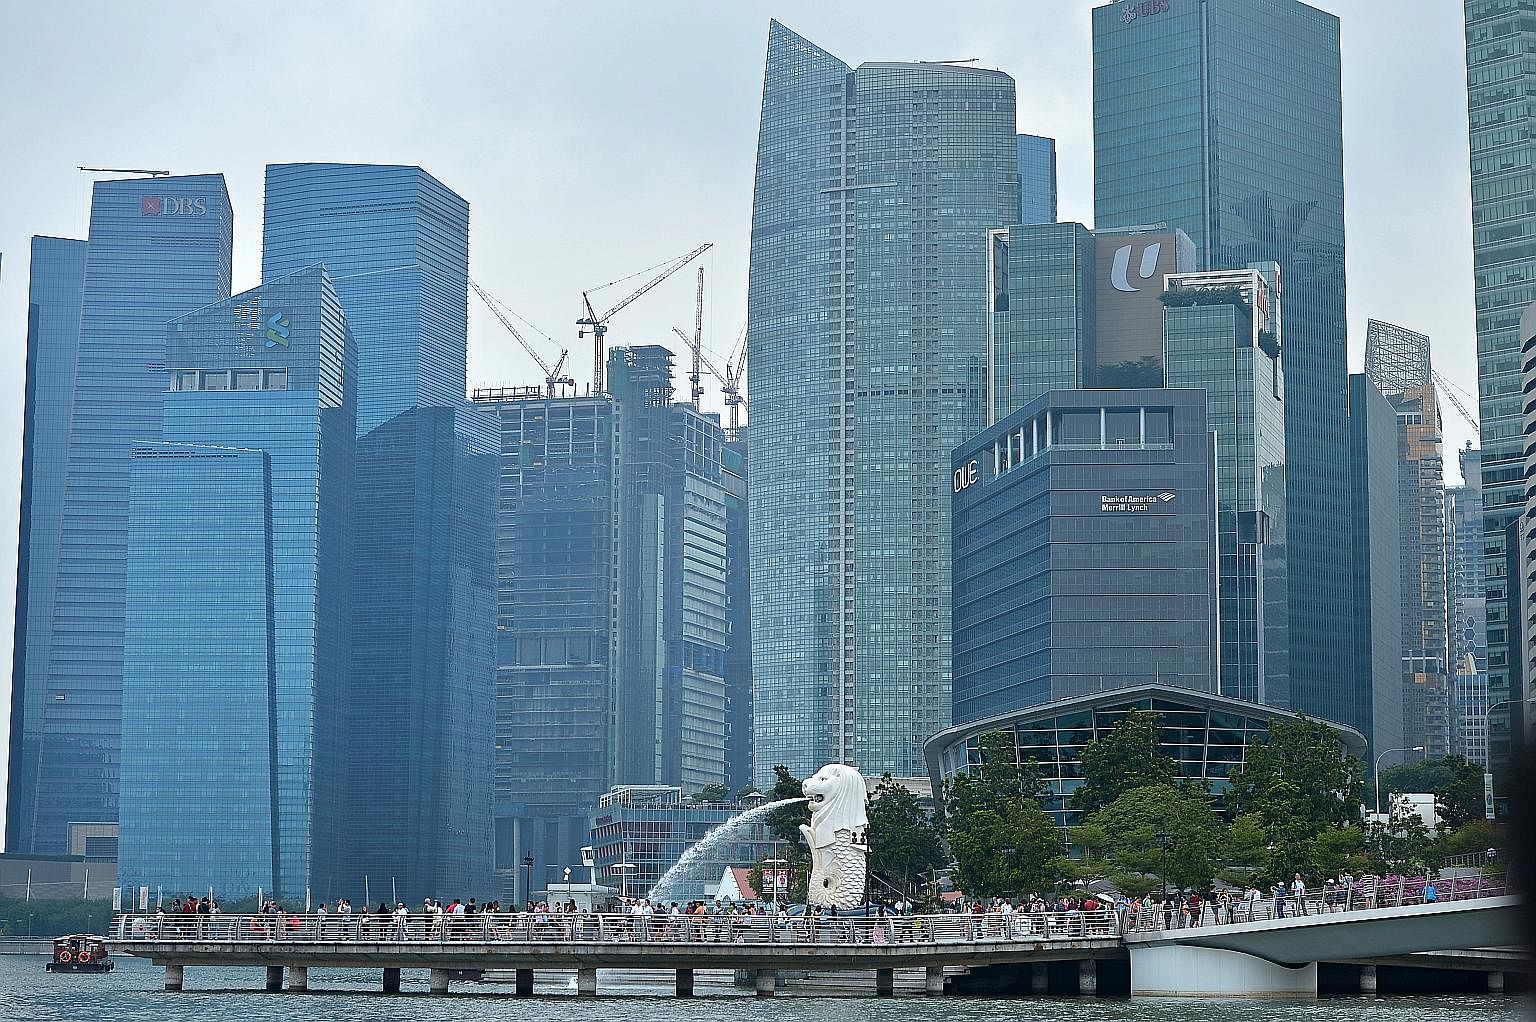 The Singapore story has depended on each generation building on what it inherited and passing on something better to the next generation. The same spirit "must animate our generation too", says the Prime Minister.